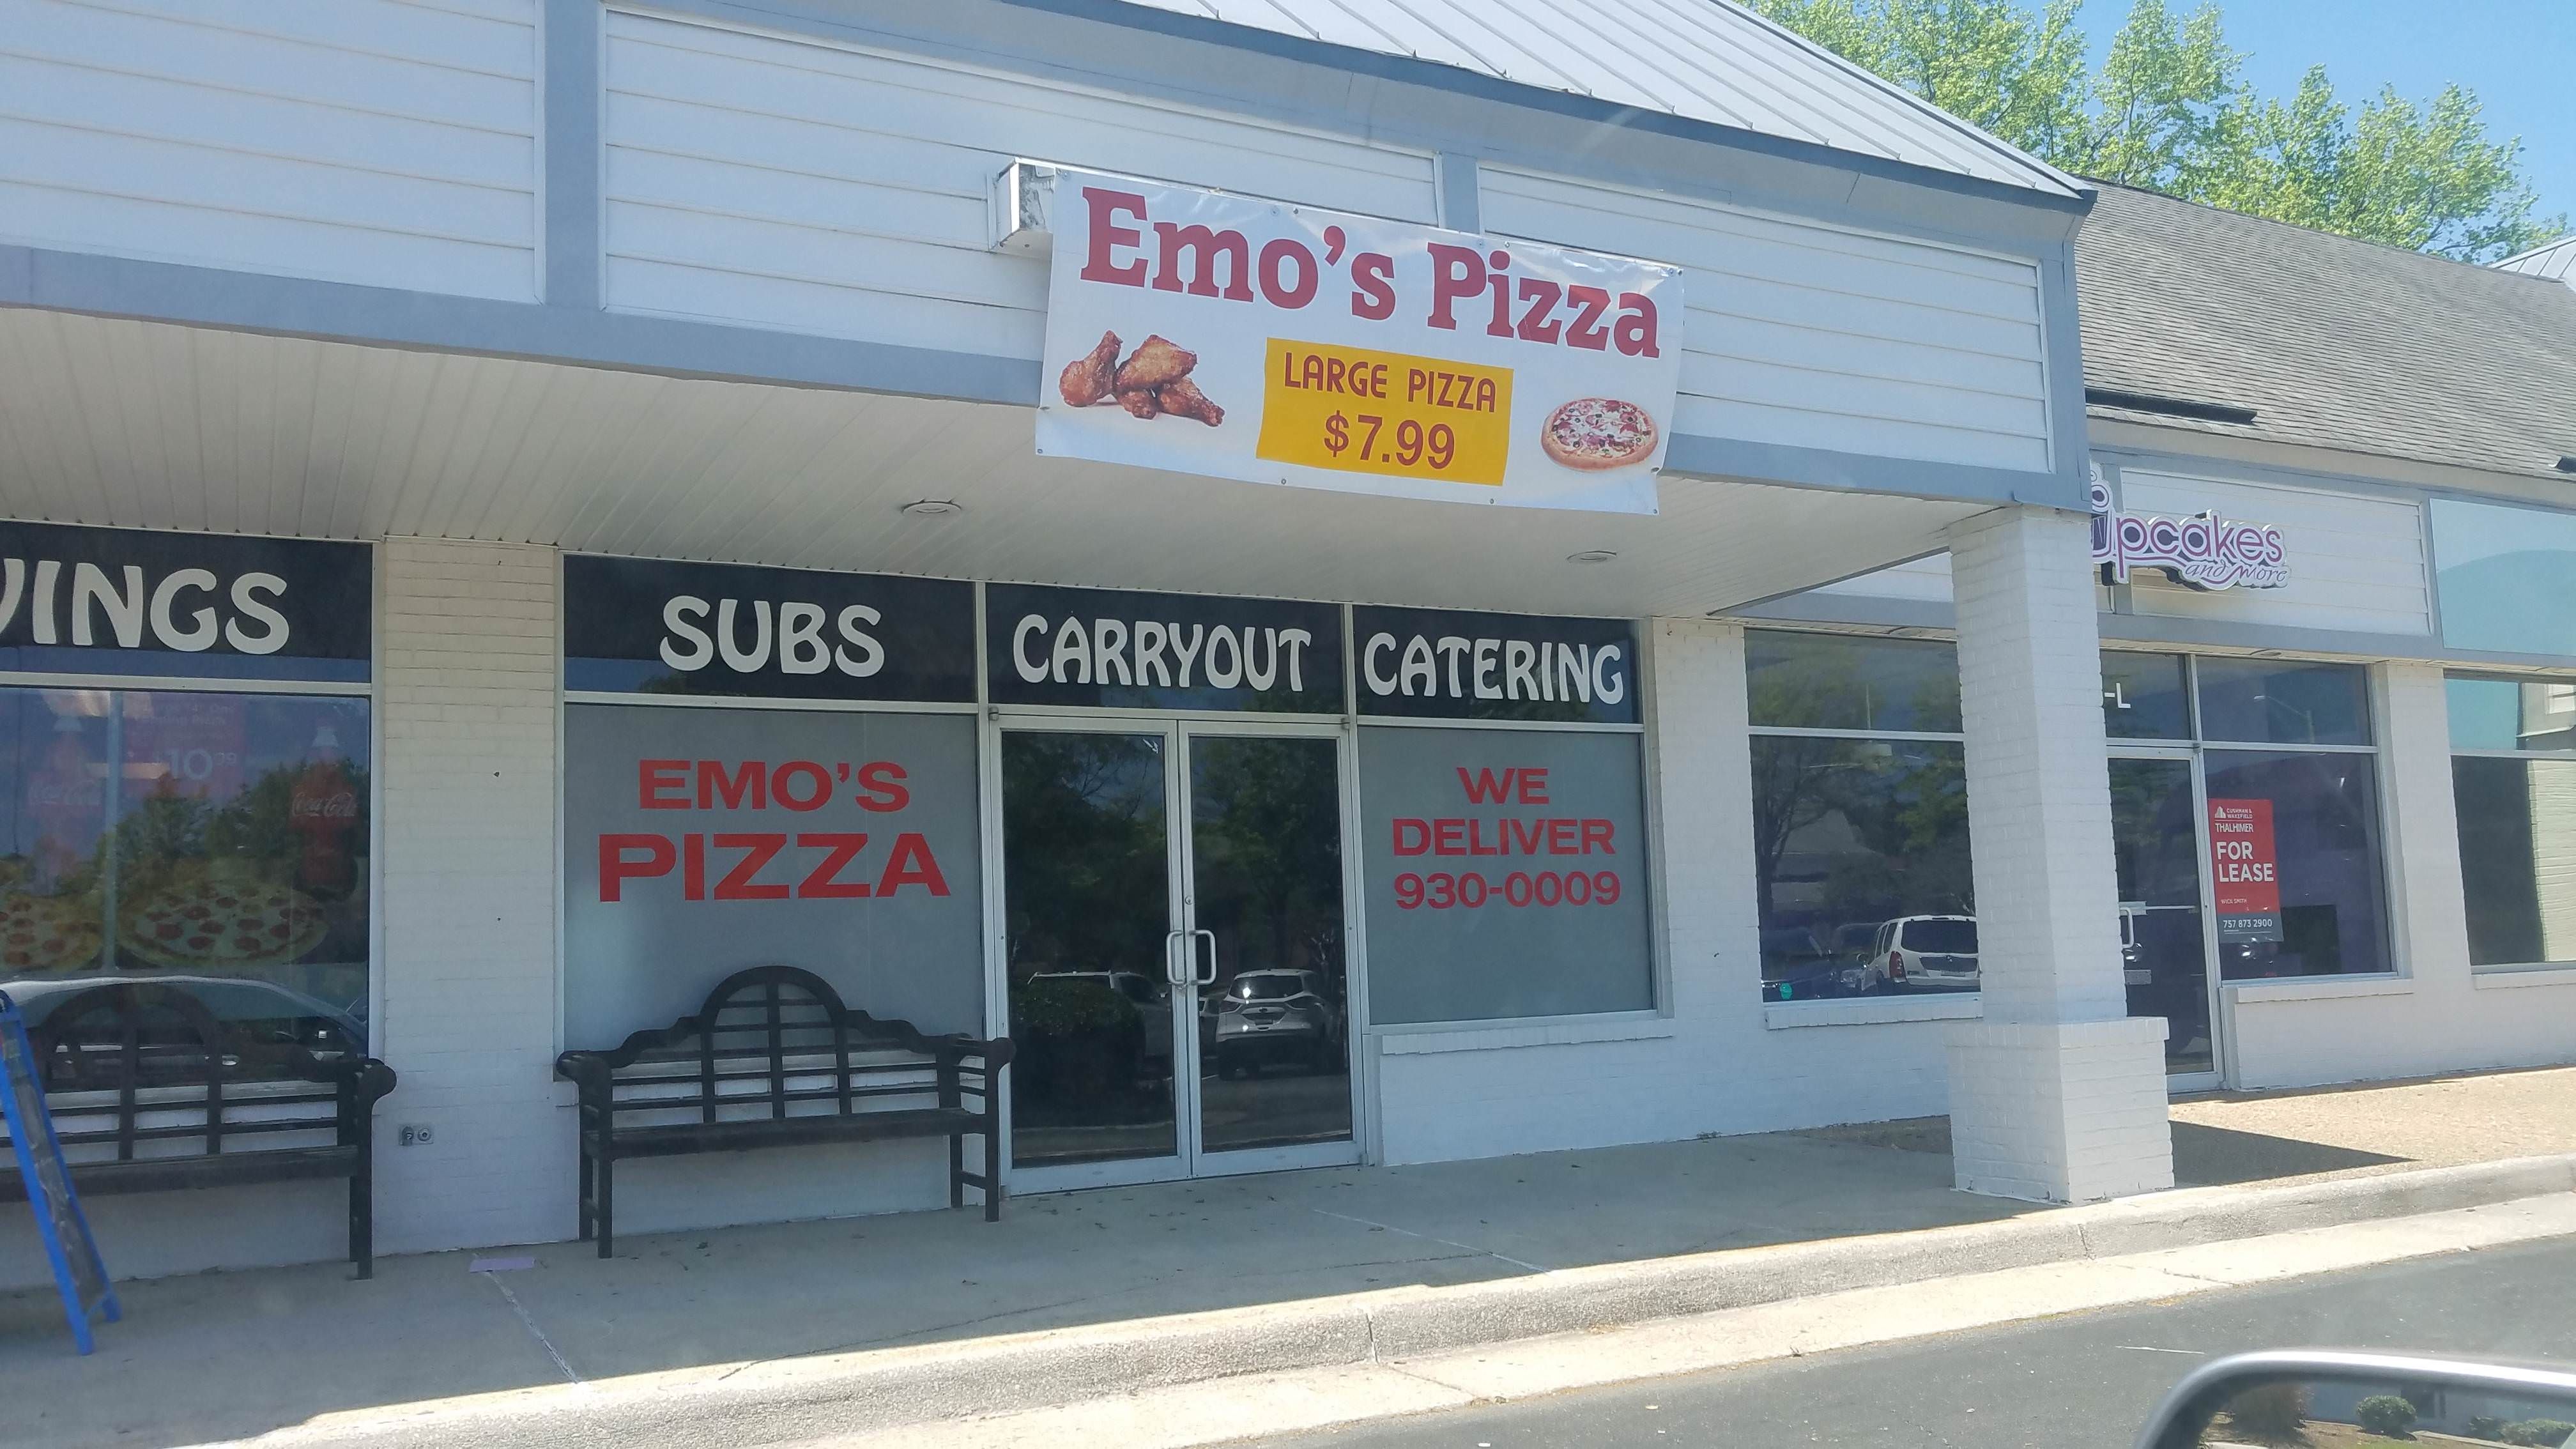 Where the pizza cuts itself